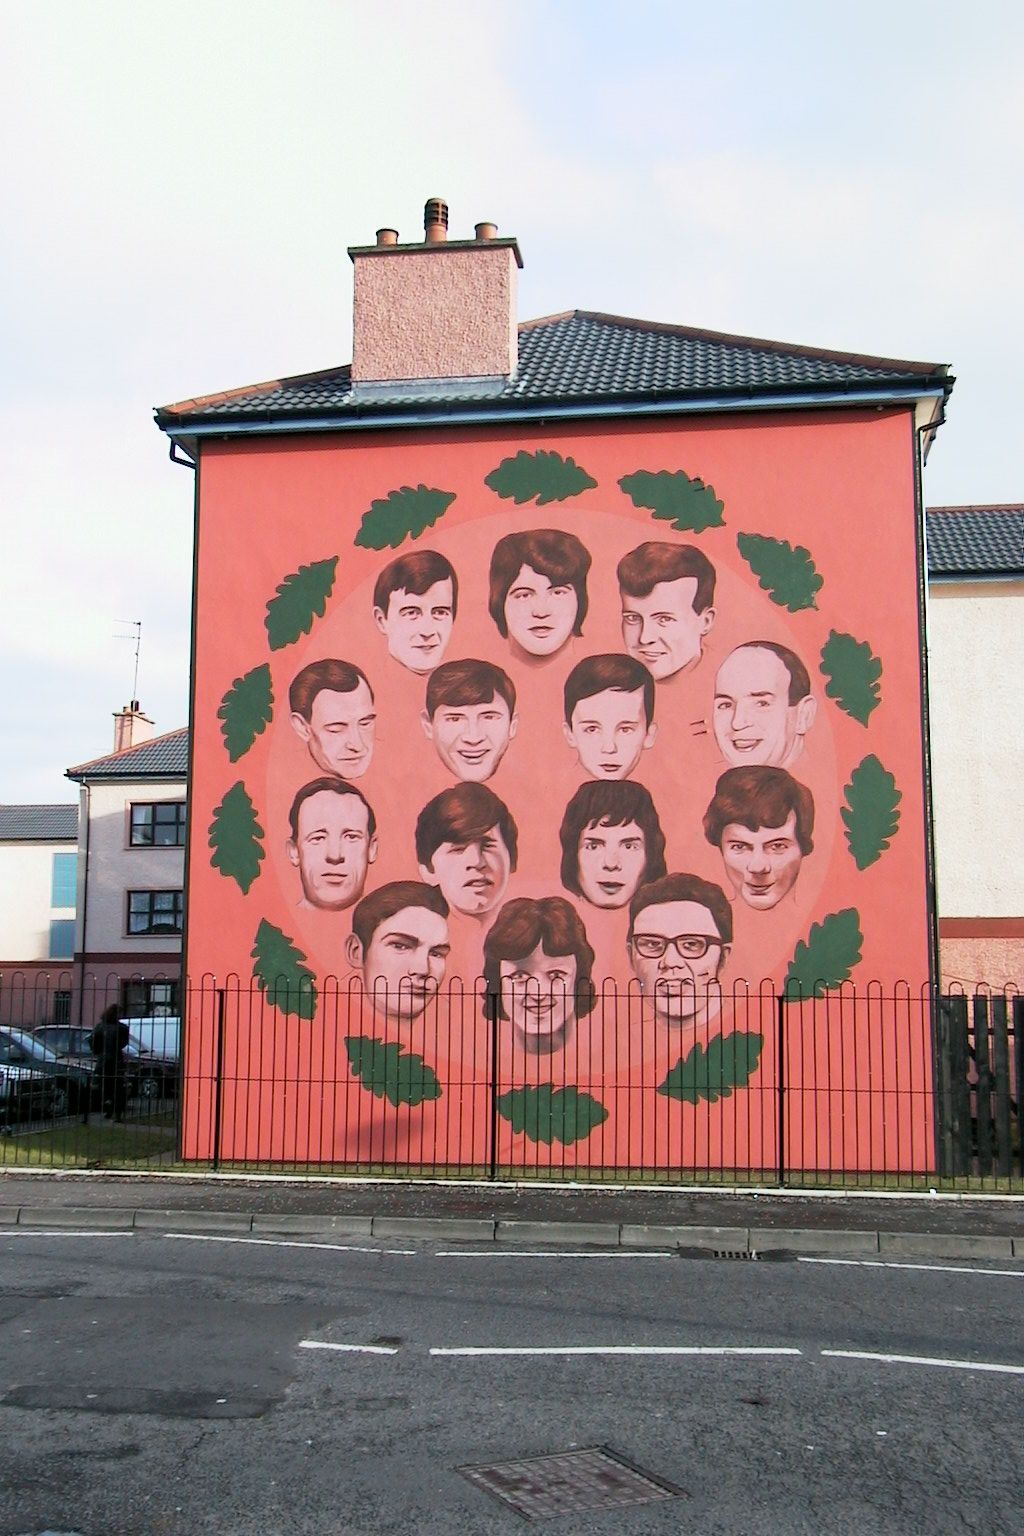 Mural of victims of Bloody Sunday